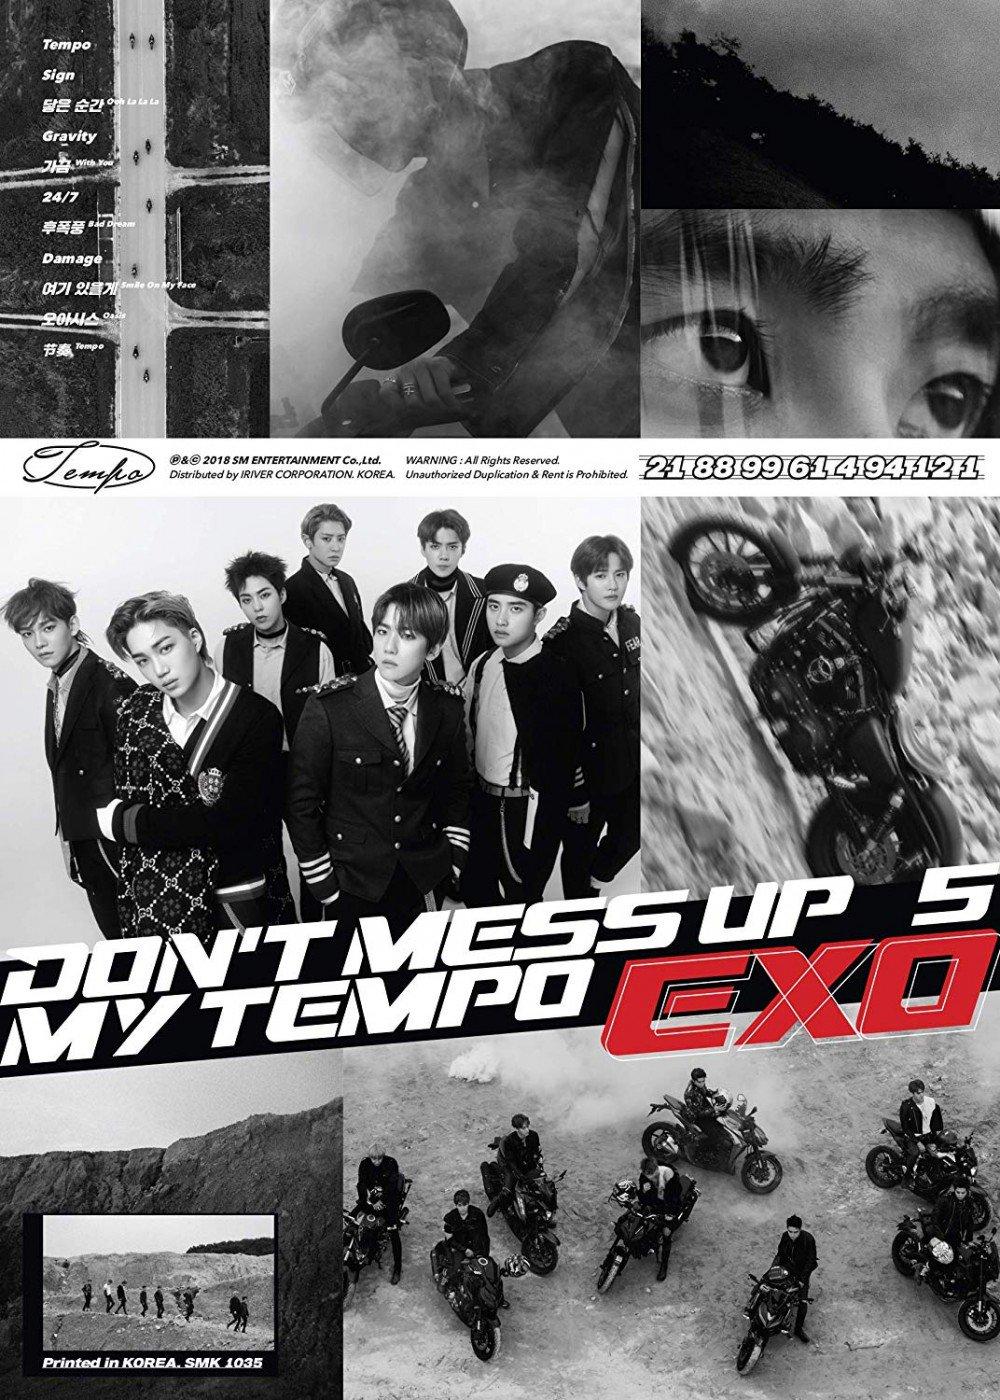 Which EXO 'Don't Mess Up My Tempo' album version do you want?